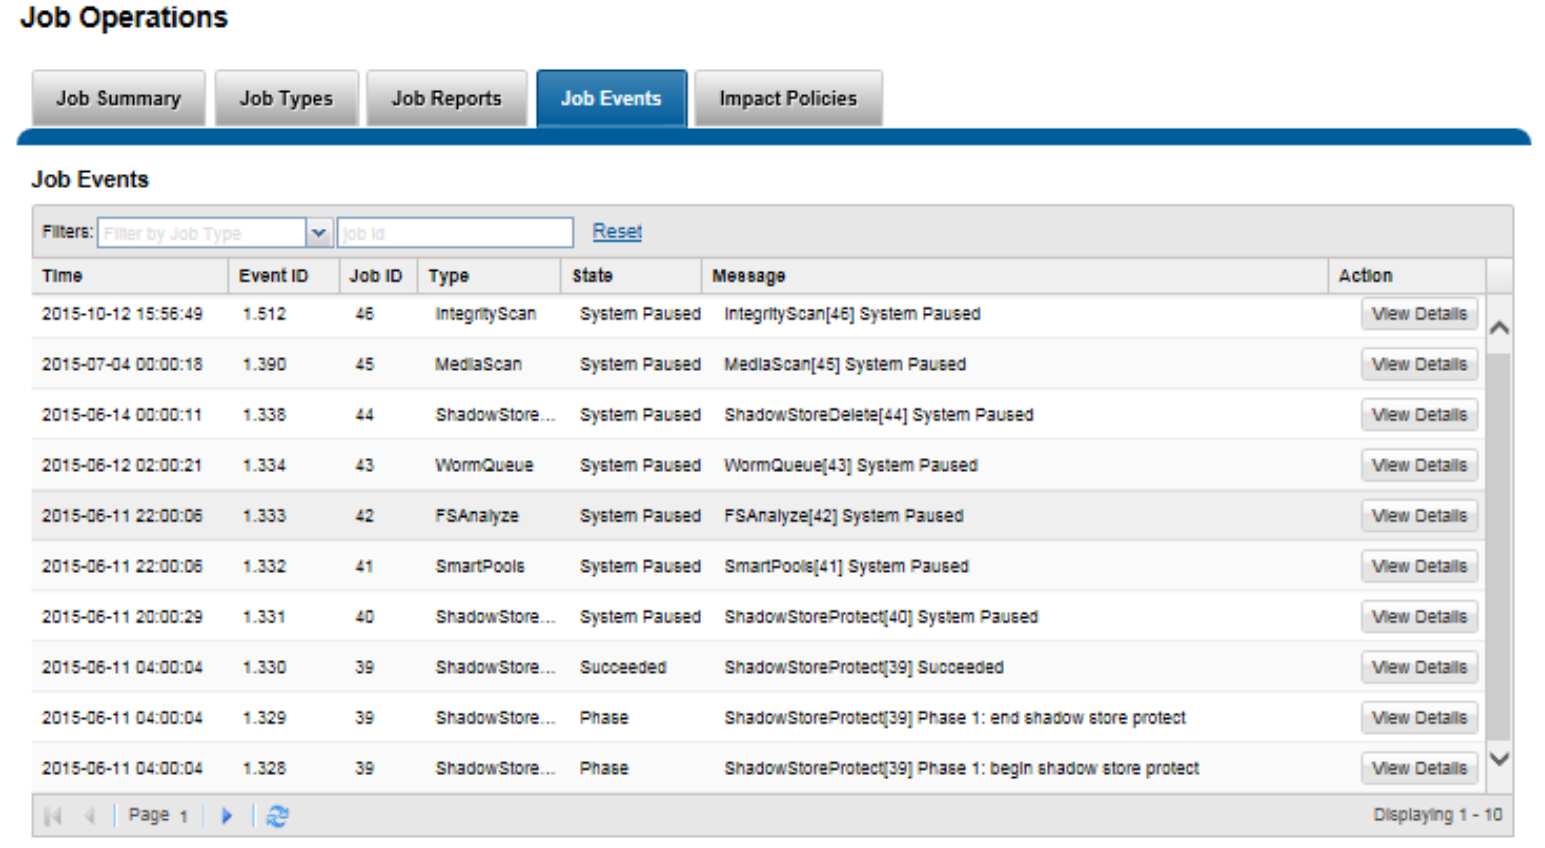 WebUI screenshot showing the job operations view of job engine events. 